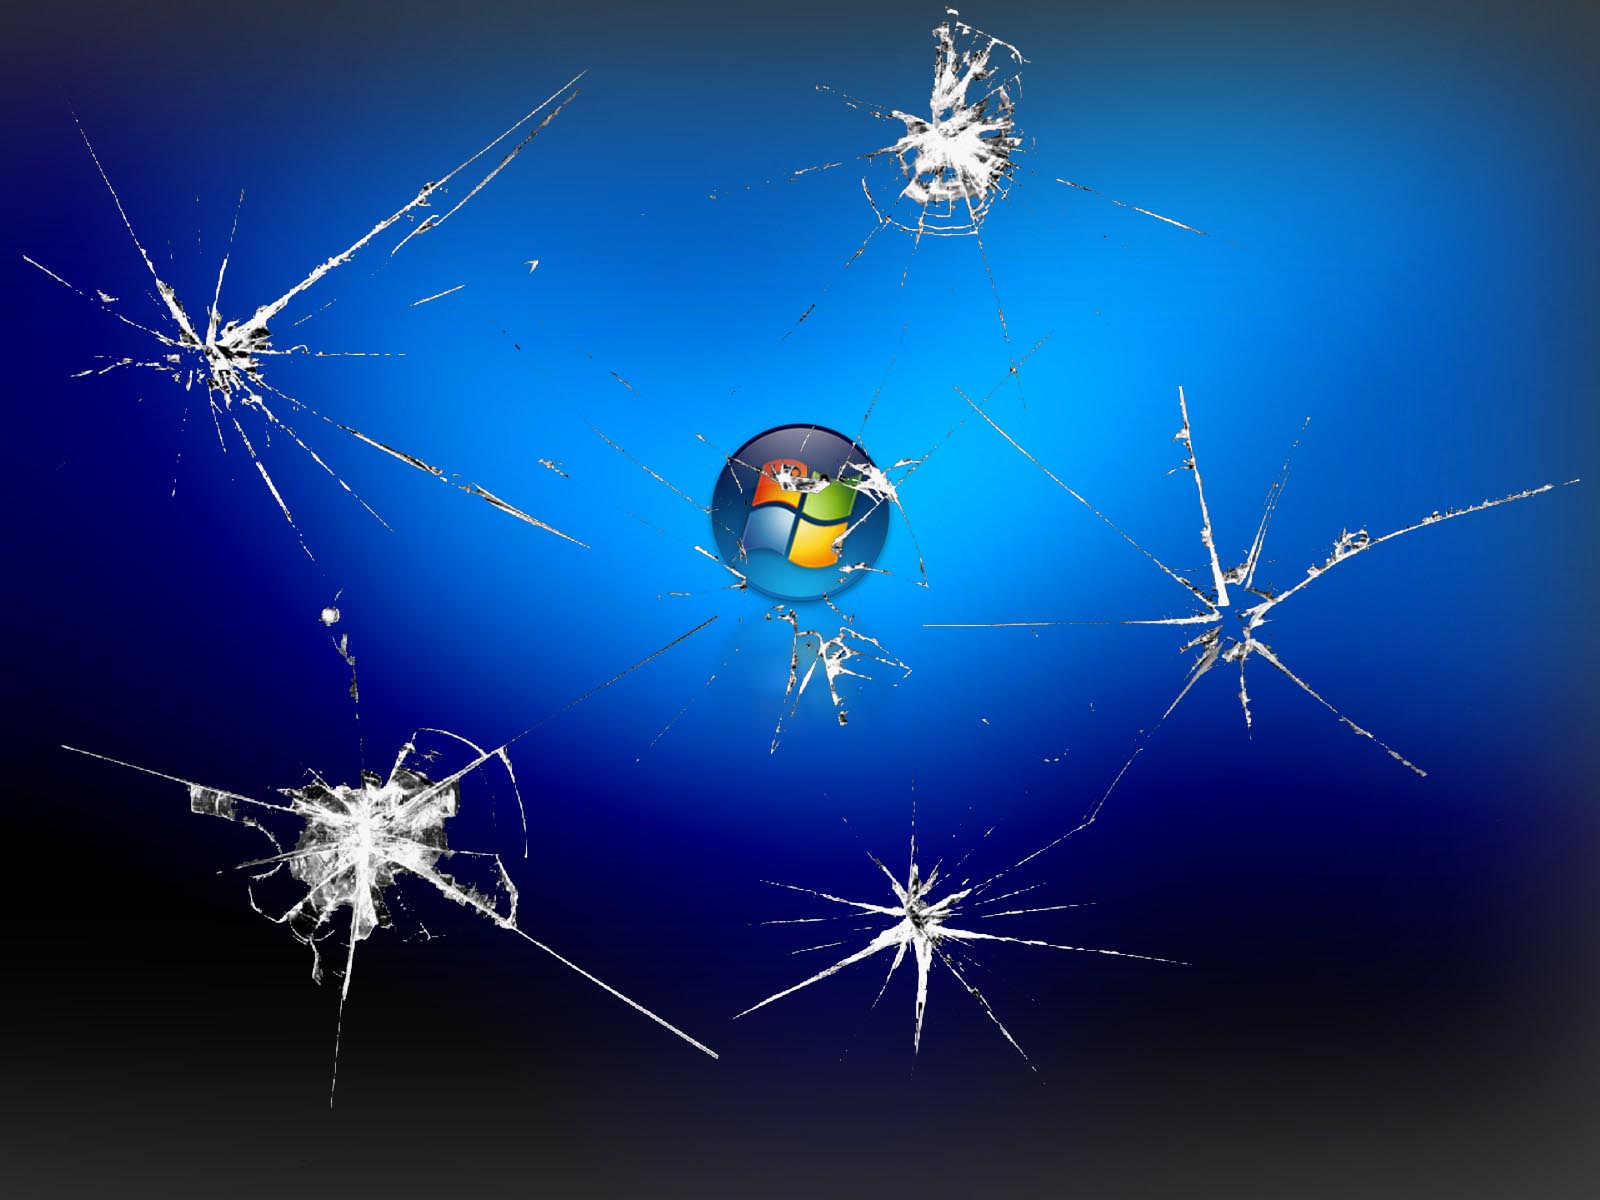 45 Realistic Cracked and Broken Screen Wallpapers